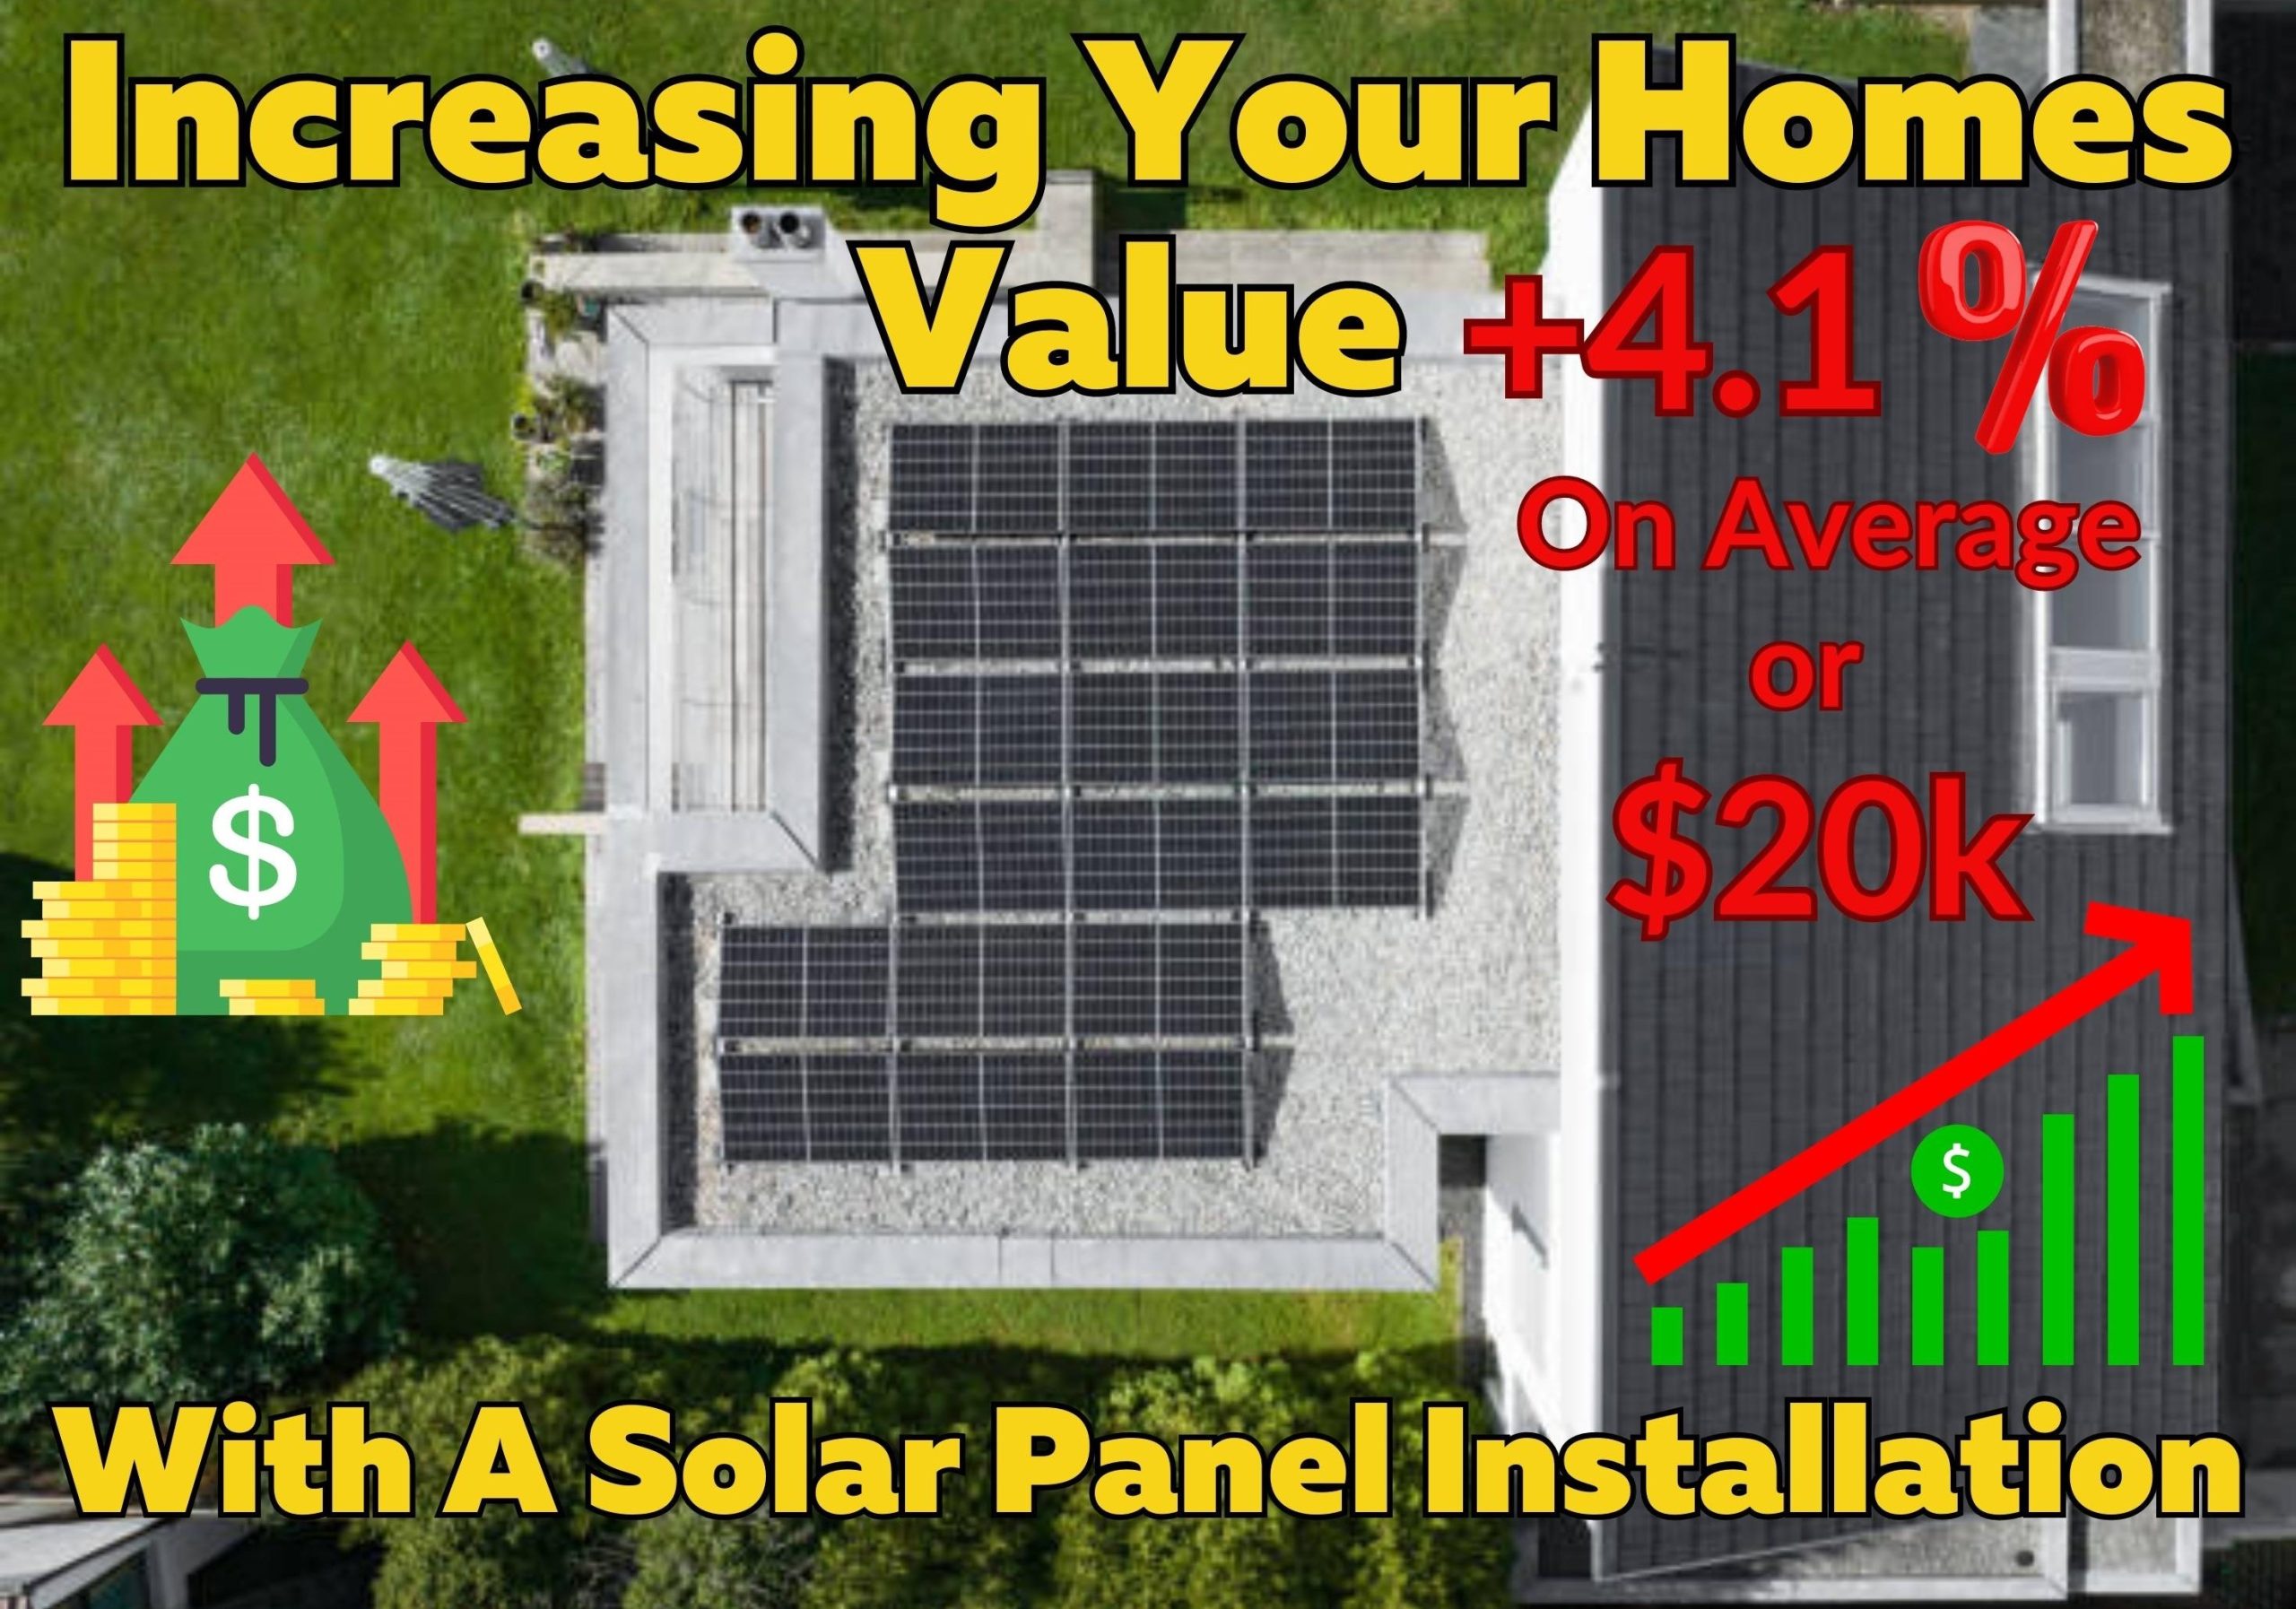 Increasing Your Homes Value with a Solar Panel Installation